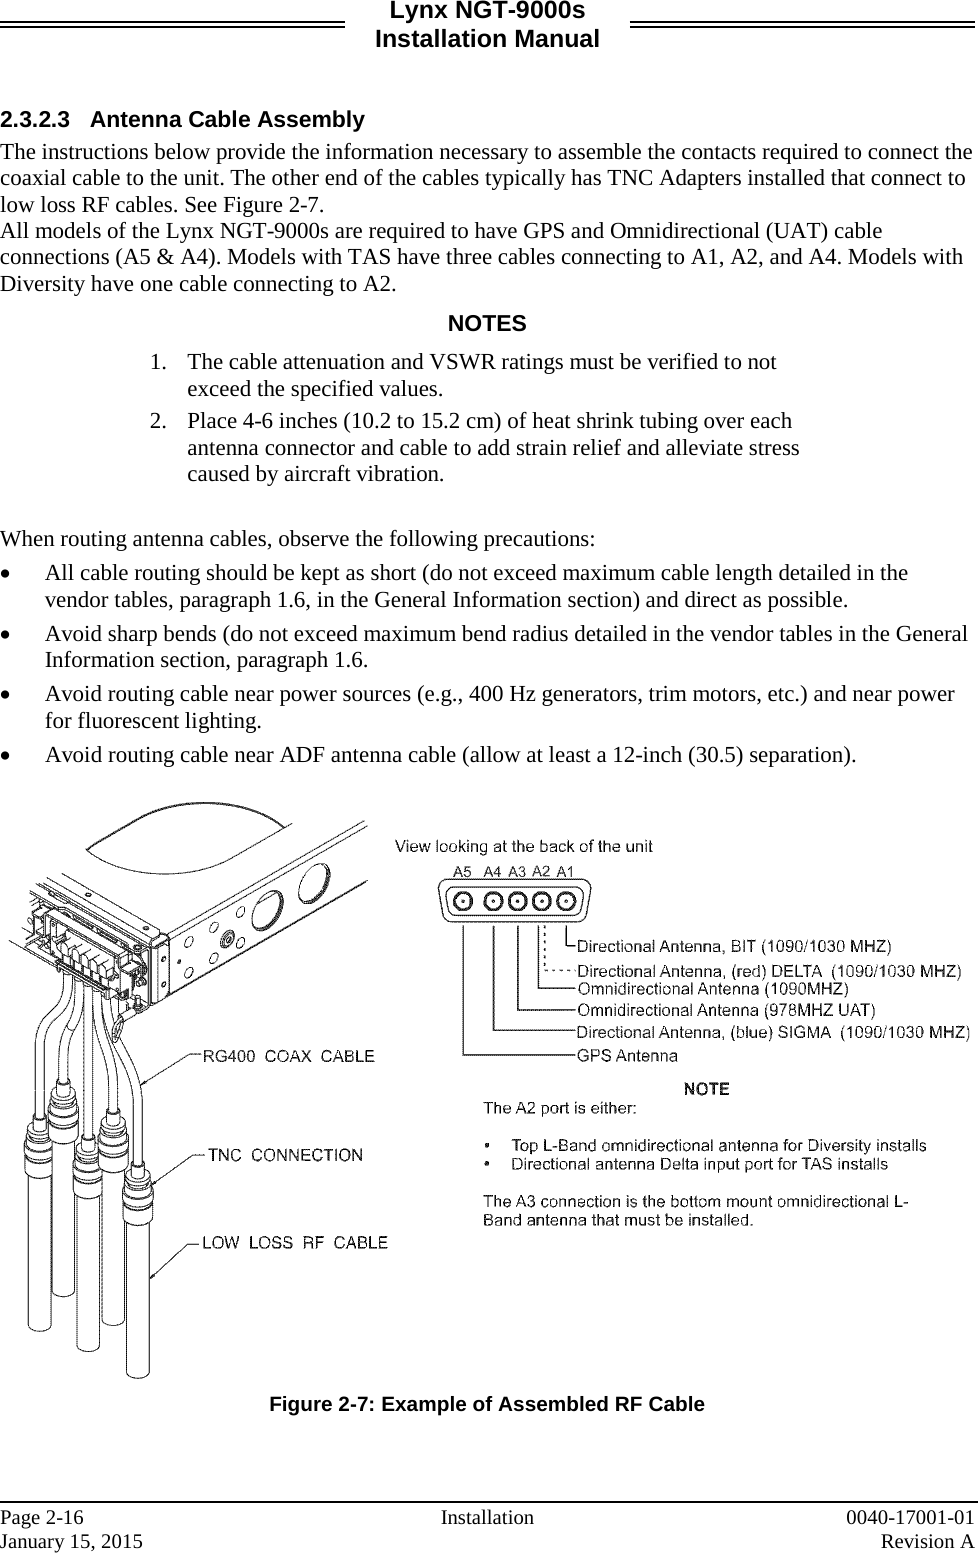 Lynx NGT-9000s Installation Manual   2.3.2.3 Antenna Cable Assembly The instructions below provide the information necessary to assemble the contacts required to connect the coaxial cable to the unit. The other end of the cables typically has TNC Adapters installed that connect to low loss RF cables. See Figure 2-7. All models of the Lynx NGT-9000s are required to have GPS and Omnidirectional (UAT) cable connections (A5 &amp; A4). Models with TAS have three cables connecting to A1, A2, and A4. Models with Diversity have one cable connecting to A2.  NOTES 1. The cable attenuation and VSWR ratings must be verified to not exceed the specified values. 2. Place 4-6 inches (10.2 to 15.2 cm) of heat shrink tubing over each antenna connector and cable to add strain relief and alleviate stress caused by aircraft vibration.  When routing antenna cables, observe the following precautions: • All cable routing should be kept as short (do not exceed maximum cable length detailed in the vendor tables, paragraph 1.6, in the General Information section) and direct as possible. • Avoid sharp bends (do not exceed maximum bend radius detailed in the vendor tables in the General Information section, paragraph 1.6. • Avoid routing cable near power sources (e.g., 400 Hz generators, trim motors, etc.) and near power for fluorescent lighting. • Avoid routing cable near ADF antenna cable (allow at least a 12-inch (30.5) separation).   Figure 2-7: Example of Assembled RF Cable    Page 2-16 Installation 0040-17001-01 January 15, 2015    Revision A  